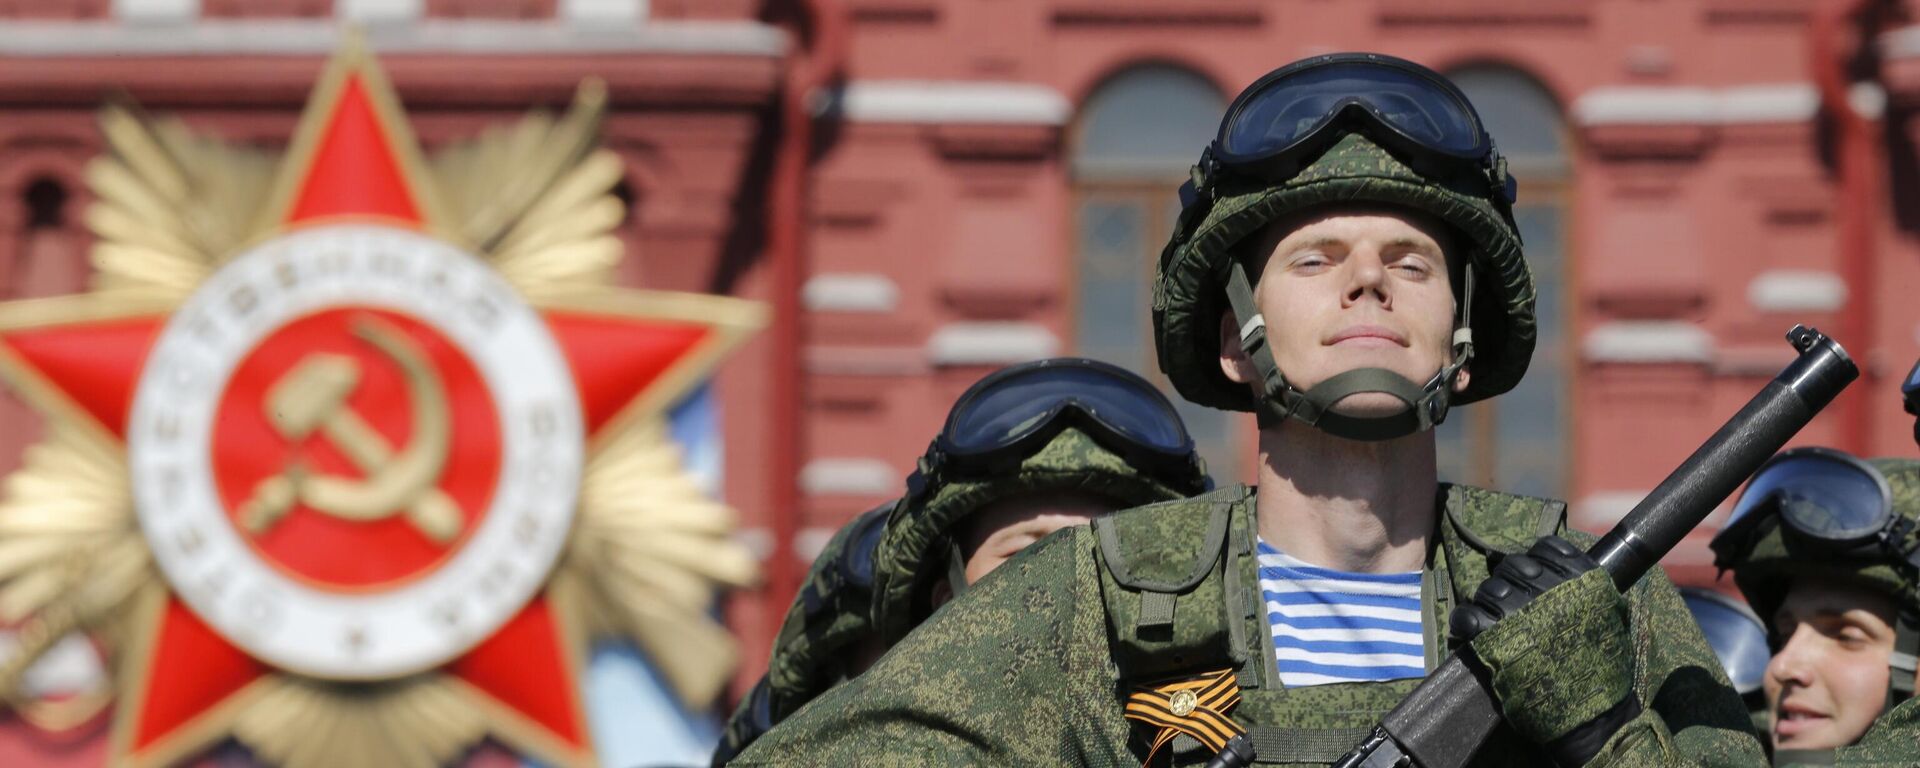 Russian soldiers march during the Victory Day military parade marking 71 years after the victory in WWII in Red Square in Moscow, Russia, Monday, May 9, 2016 - Sputnik International, 1920, 07.05.2024